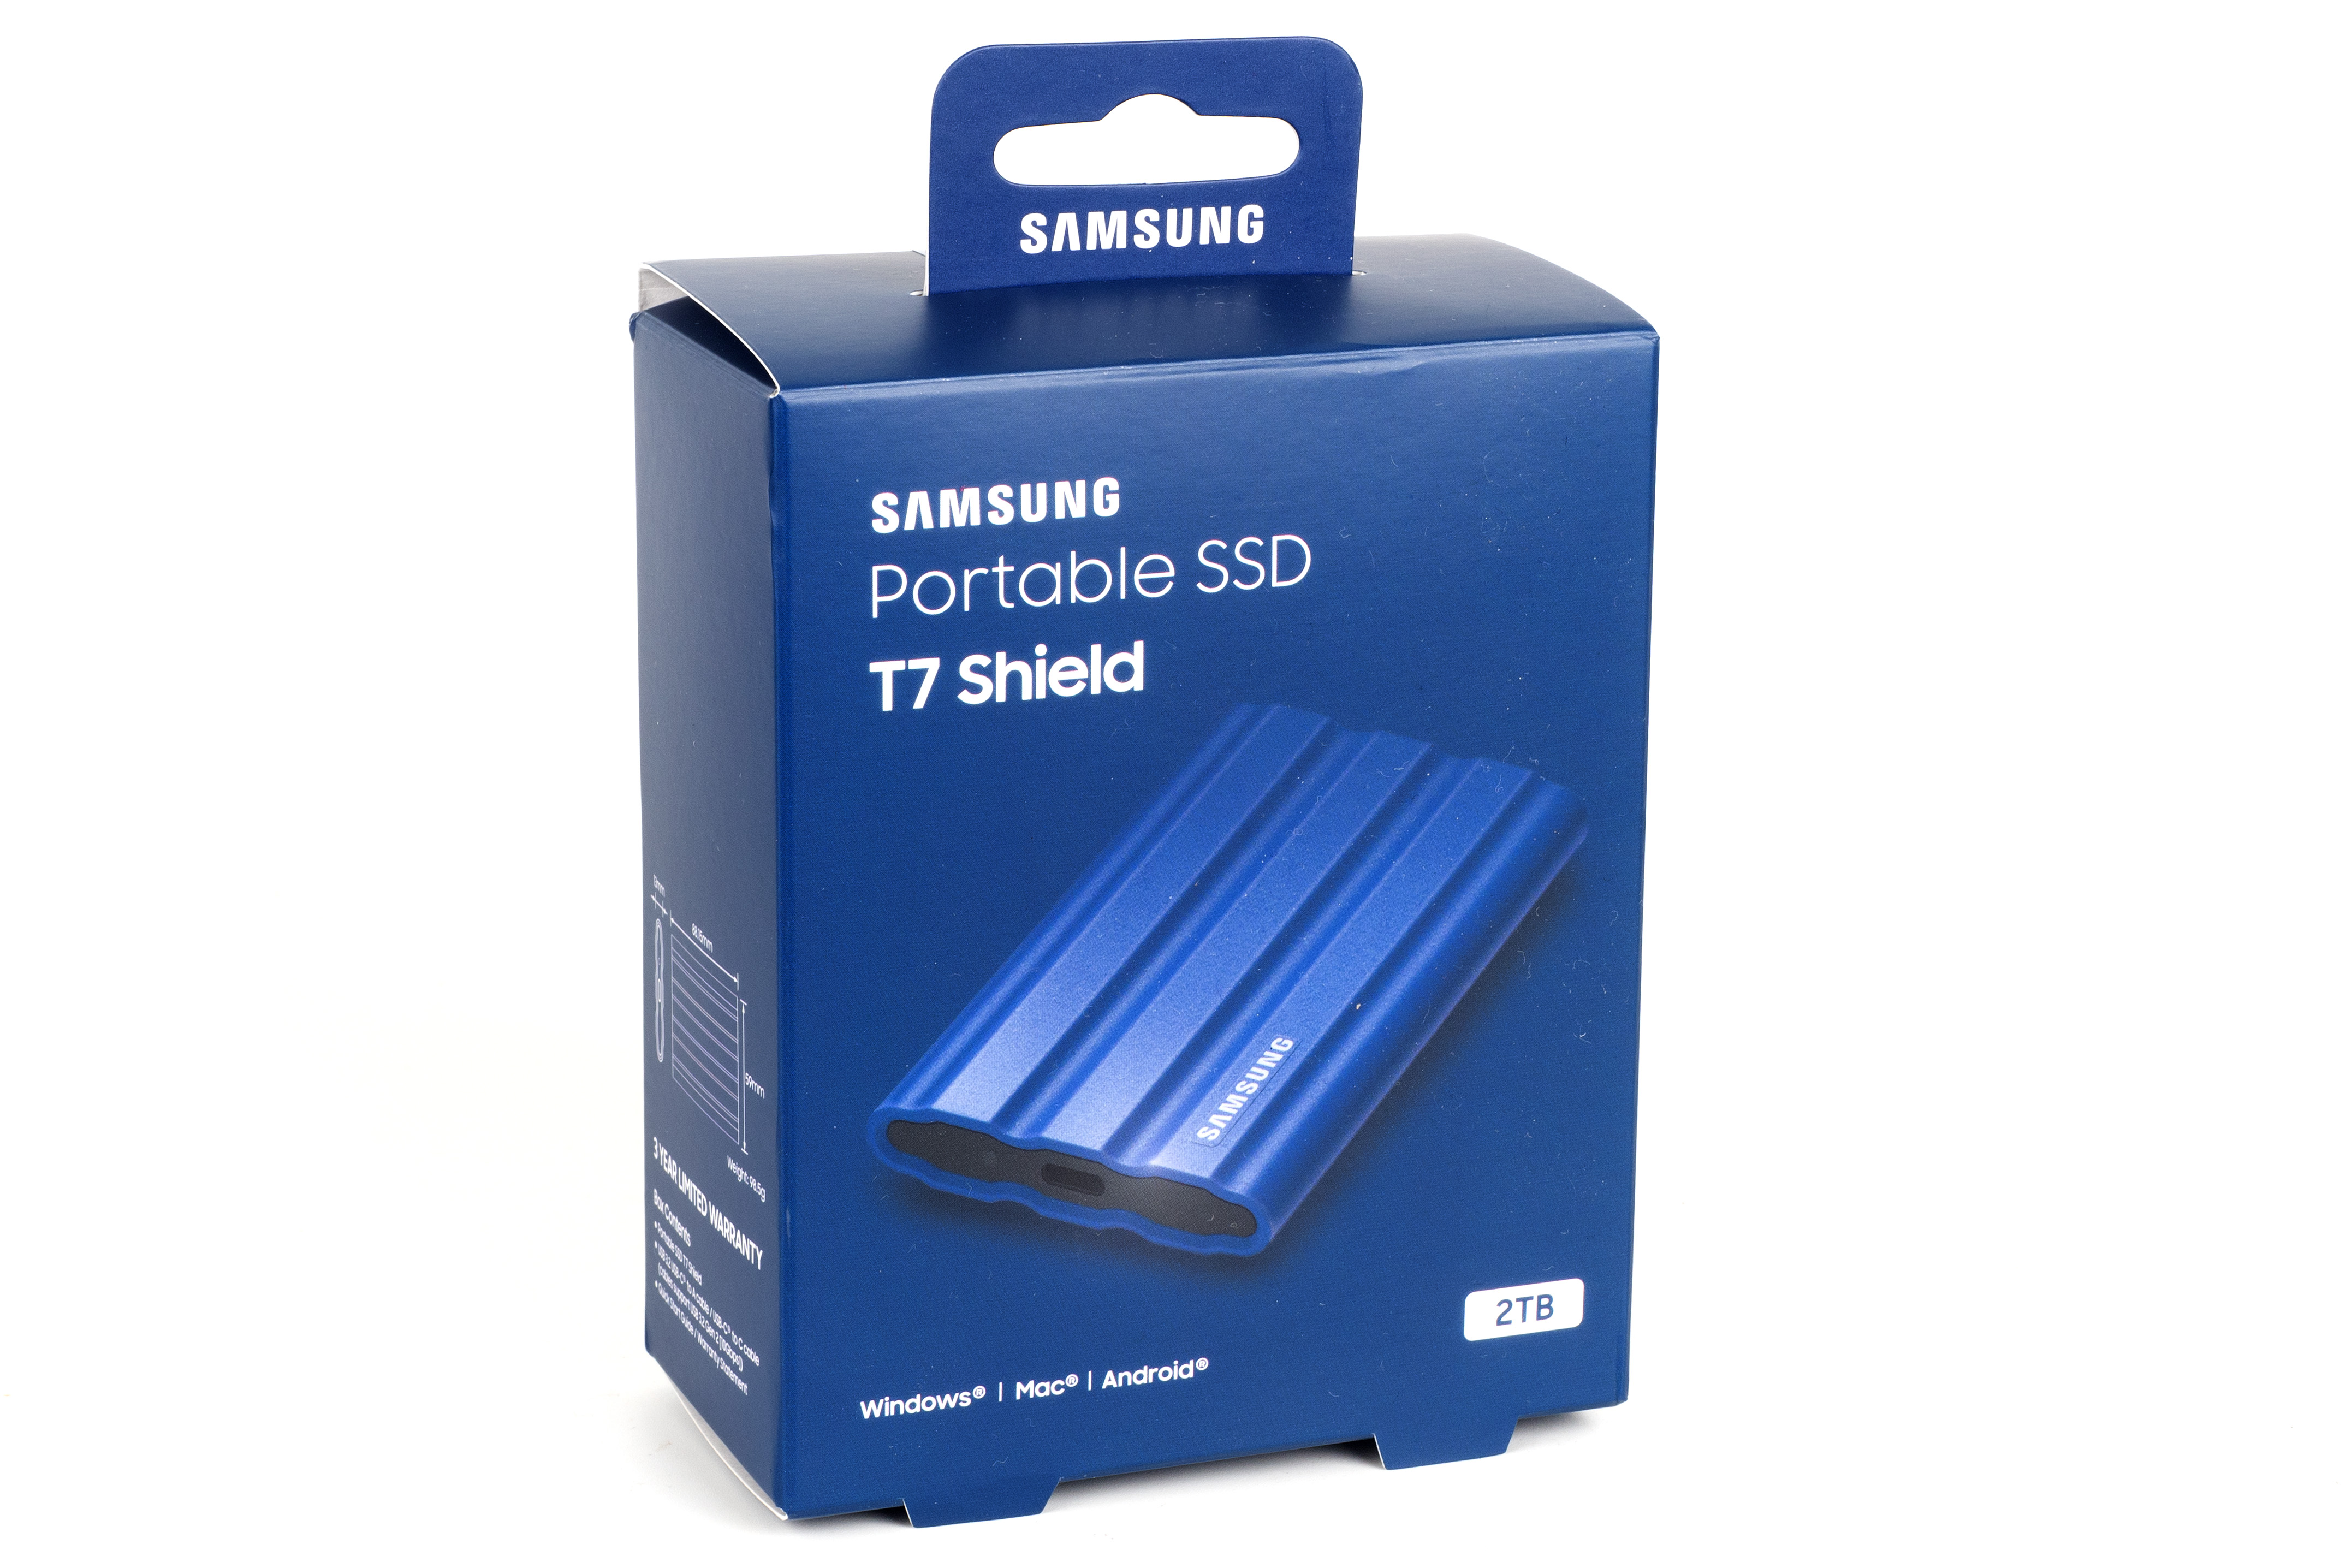 Samsung Portable SSD T7 Shield packaging